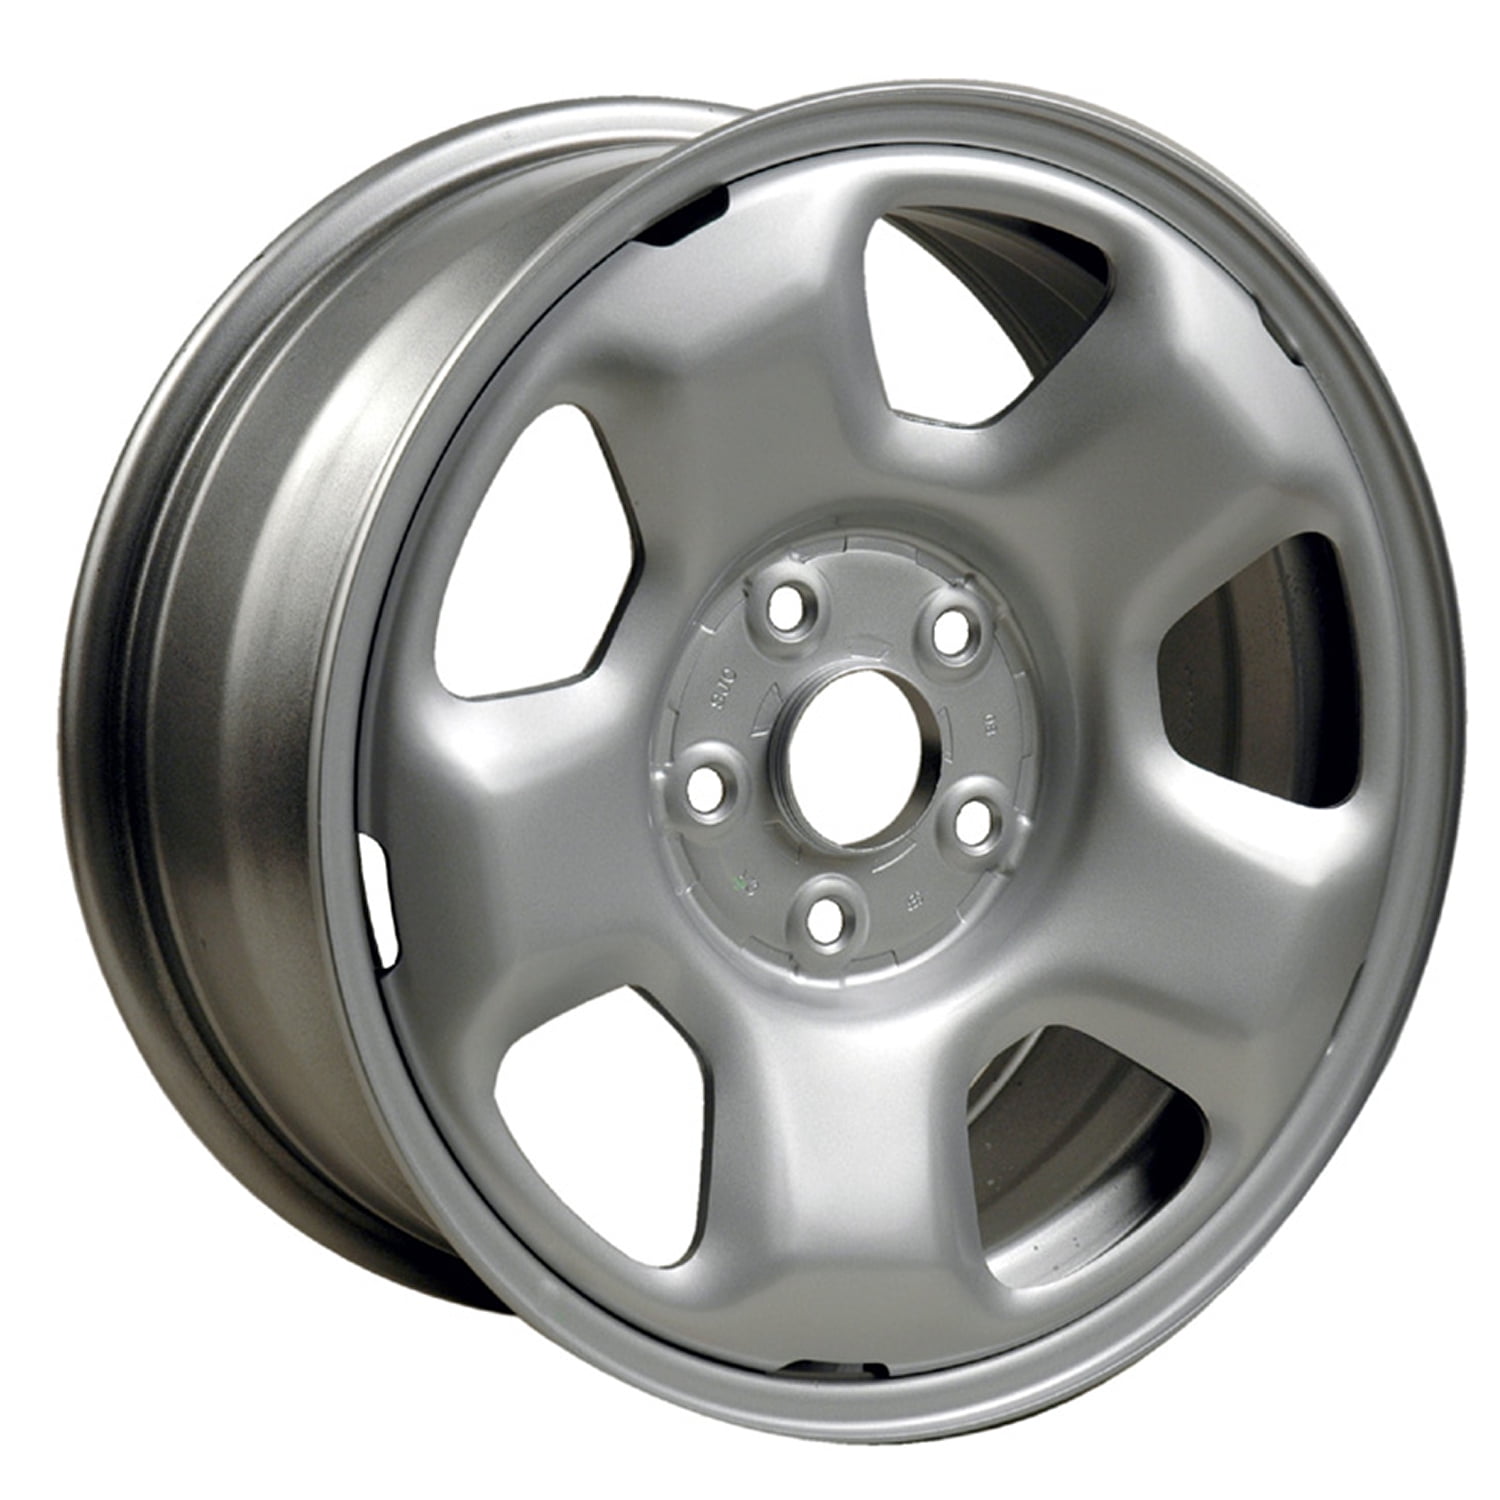 17 X 7.5 Reconditioned OEM Steel Wheel, All Painted Silver, Fits 2006